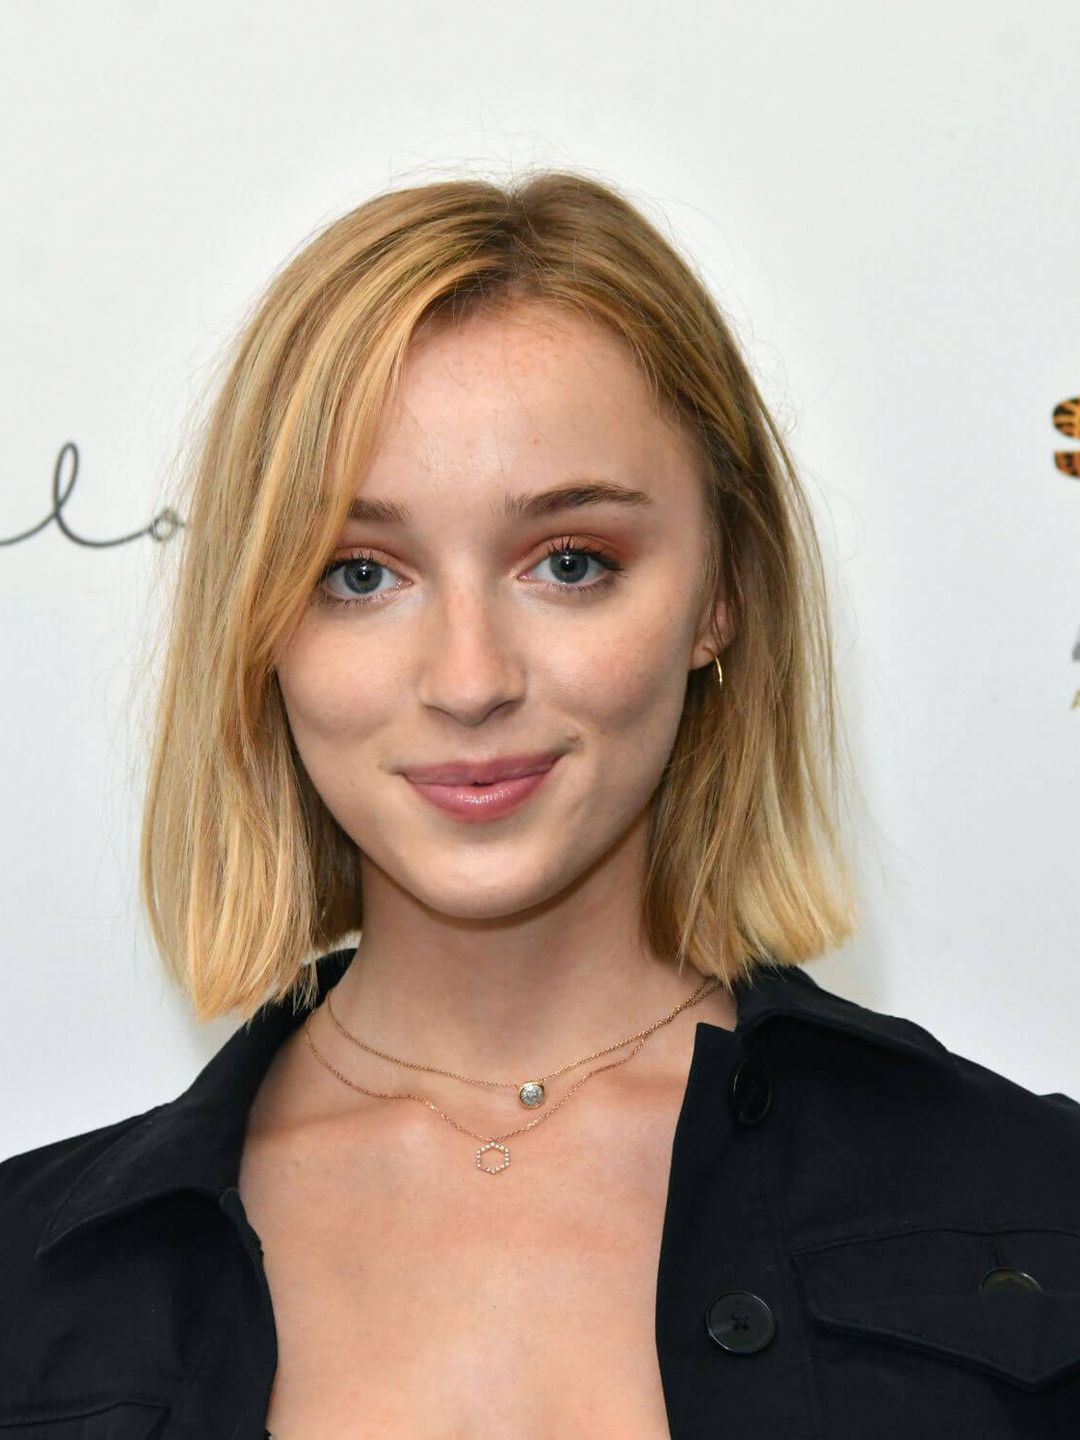 Phoebe Dynevor way to success